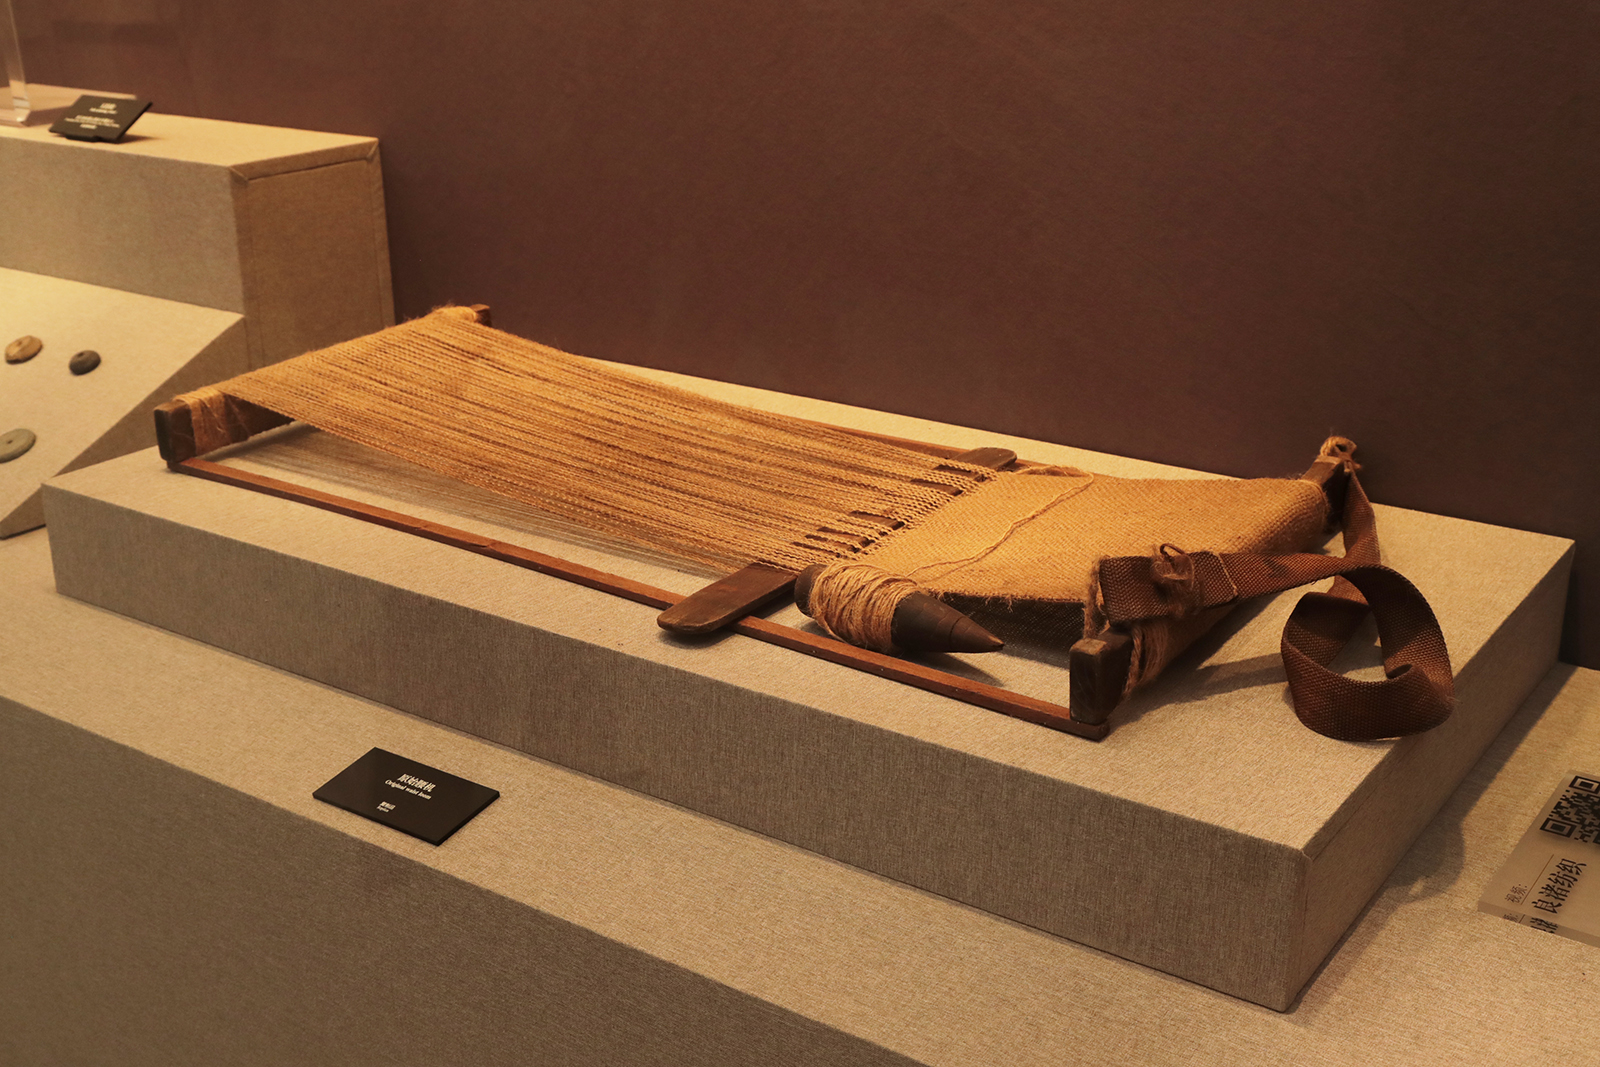 A replica of an original waist loom used during the time of Liangzhu Ancient City is on display at the Liangzhu Museum in Hangzhou, Zhejiang Province. /CGTN